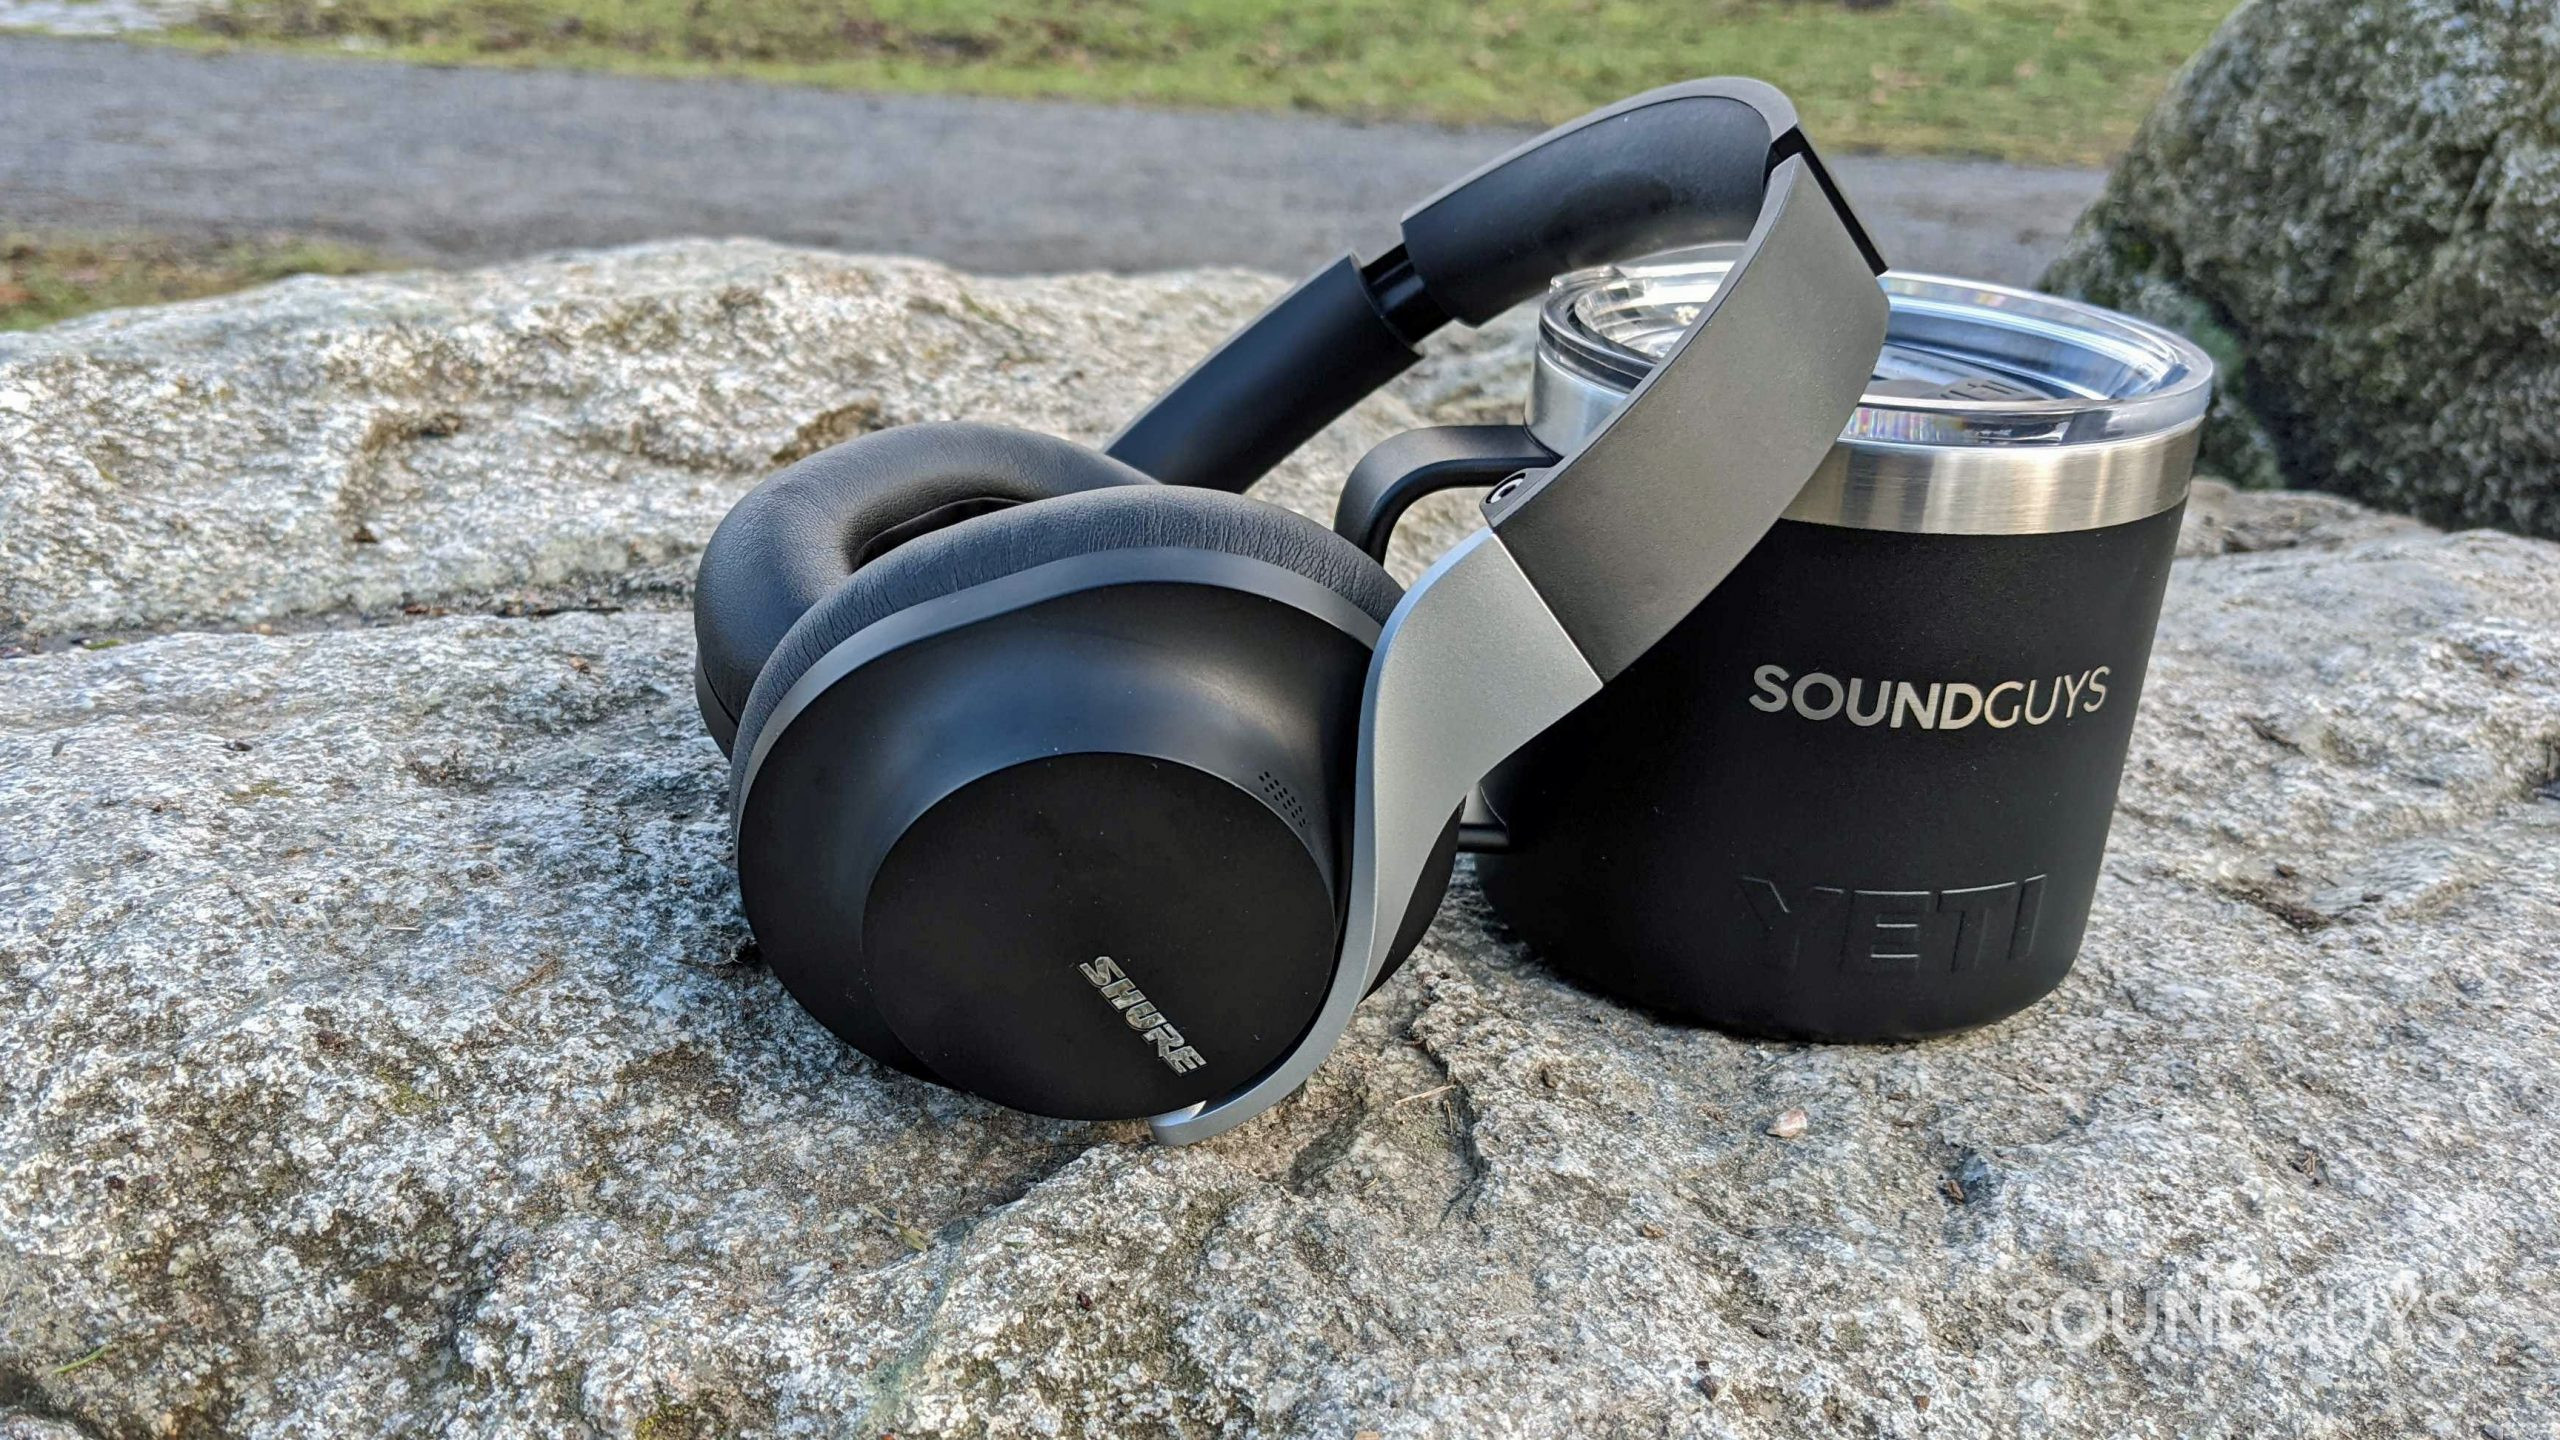 Shure AONIC 50 review: King of quality - SoundGuys